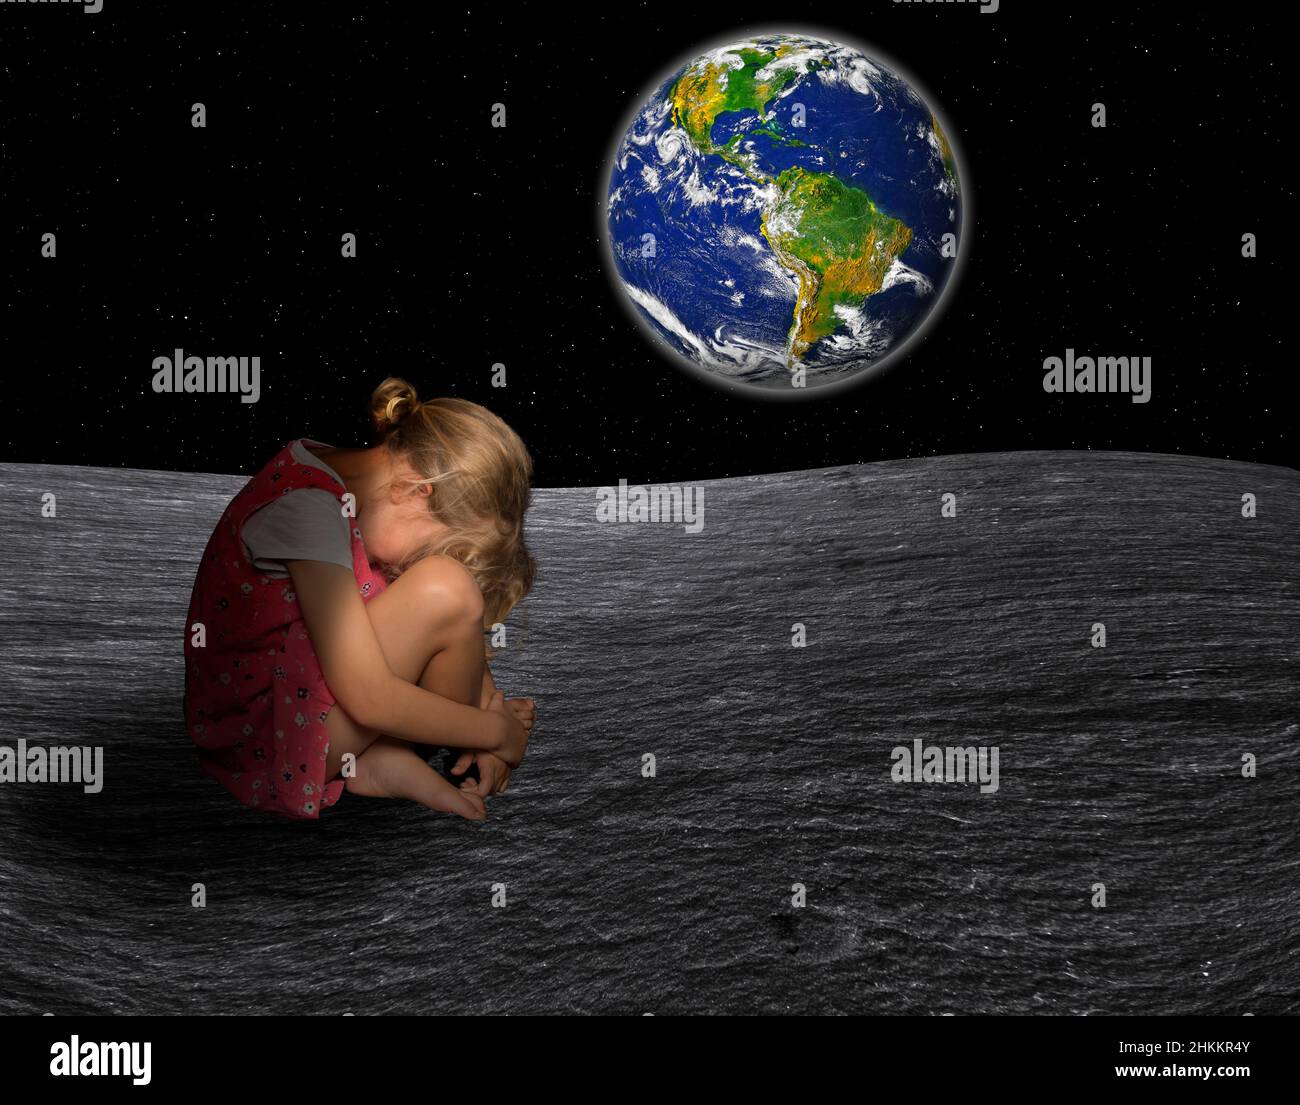 Climate change helplessness, conceptual composite image Stock Photo